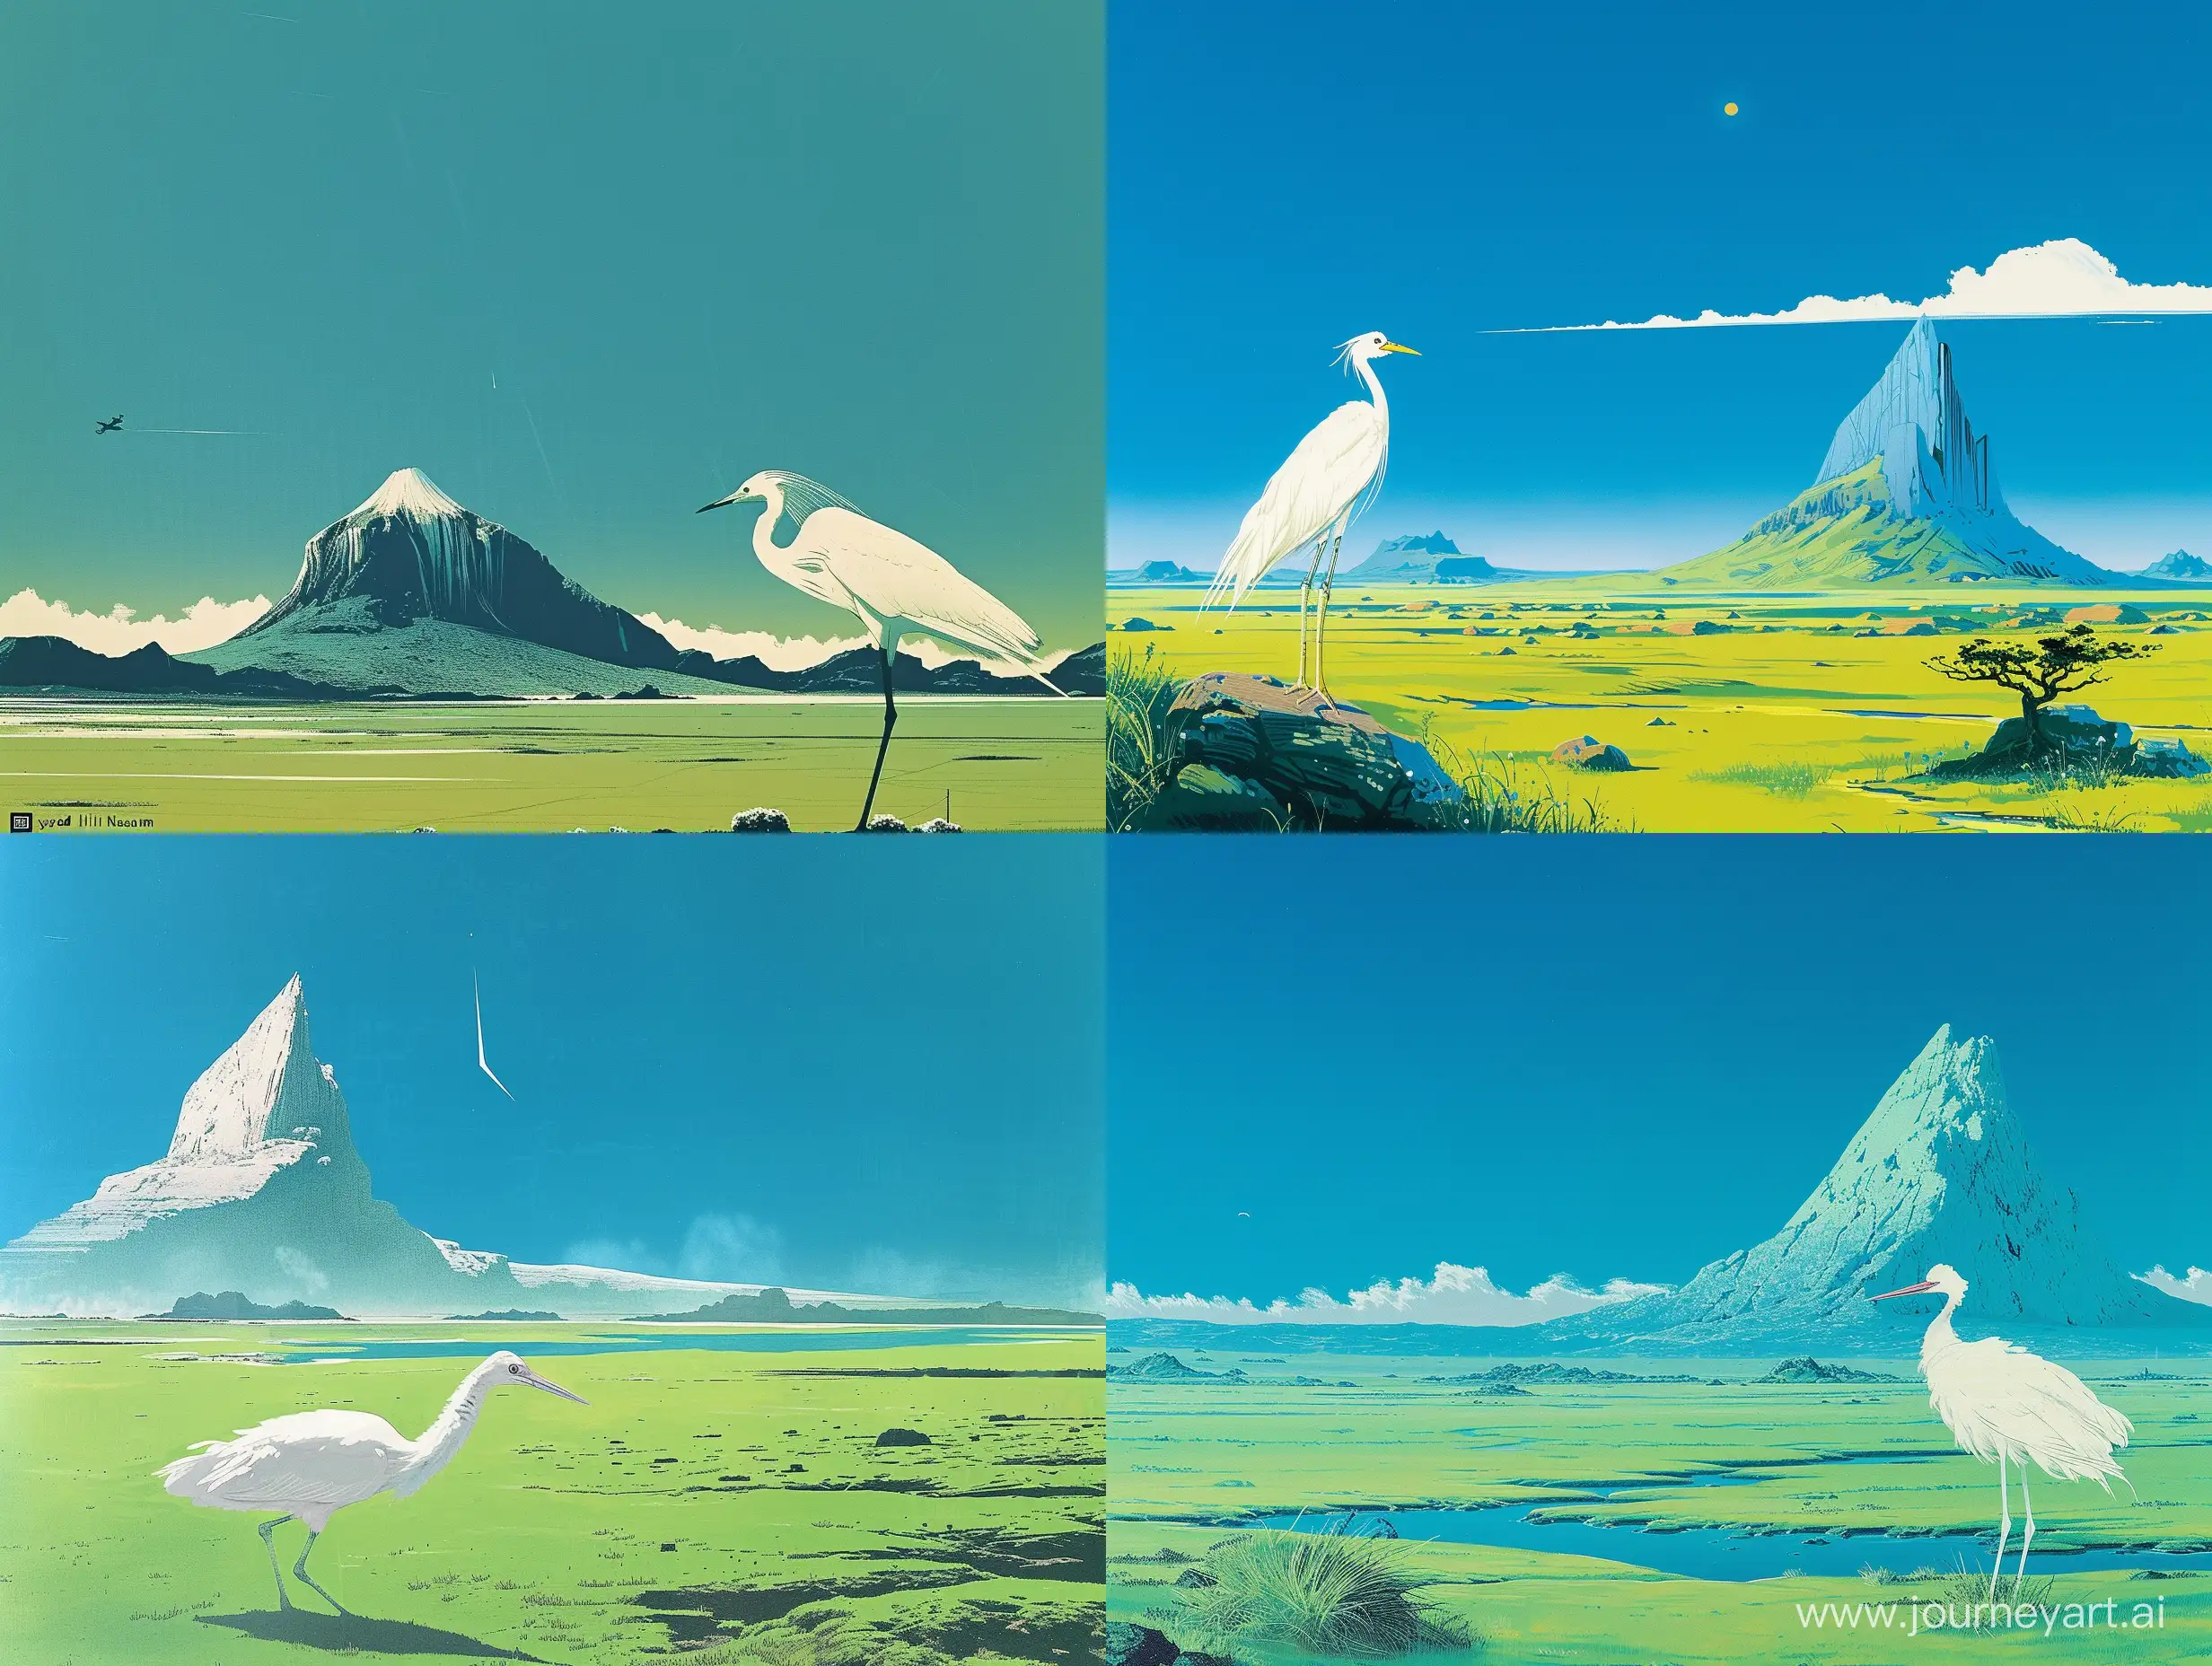 White-Bird-Soaring-over-Green-Plains-and-Majestic-Mountain-Synthwave-Retro-Fantasy-Art-Poster